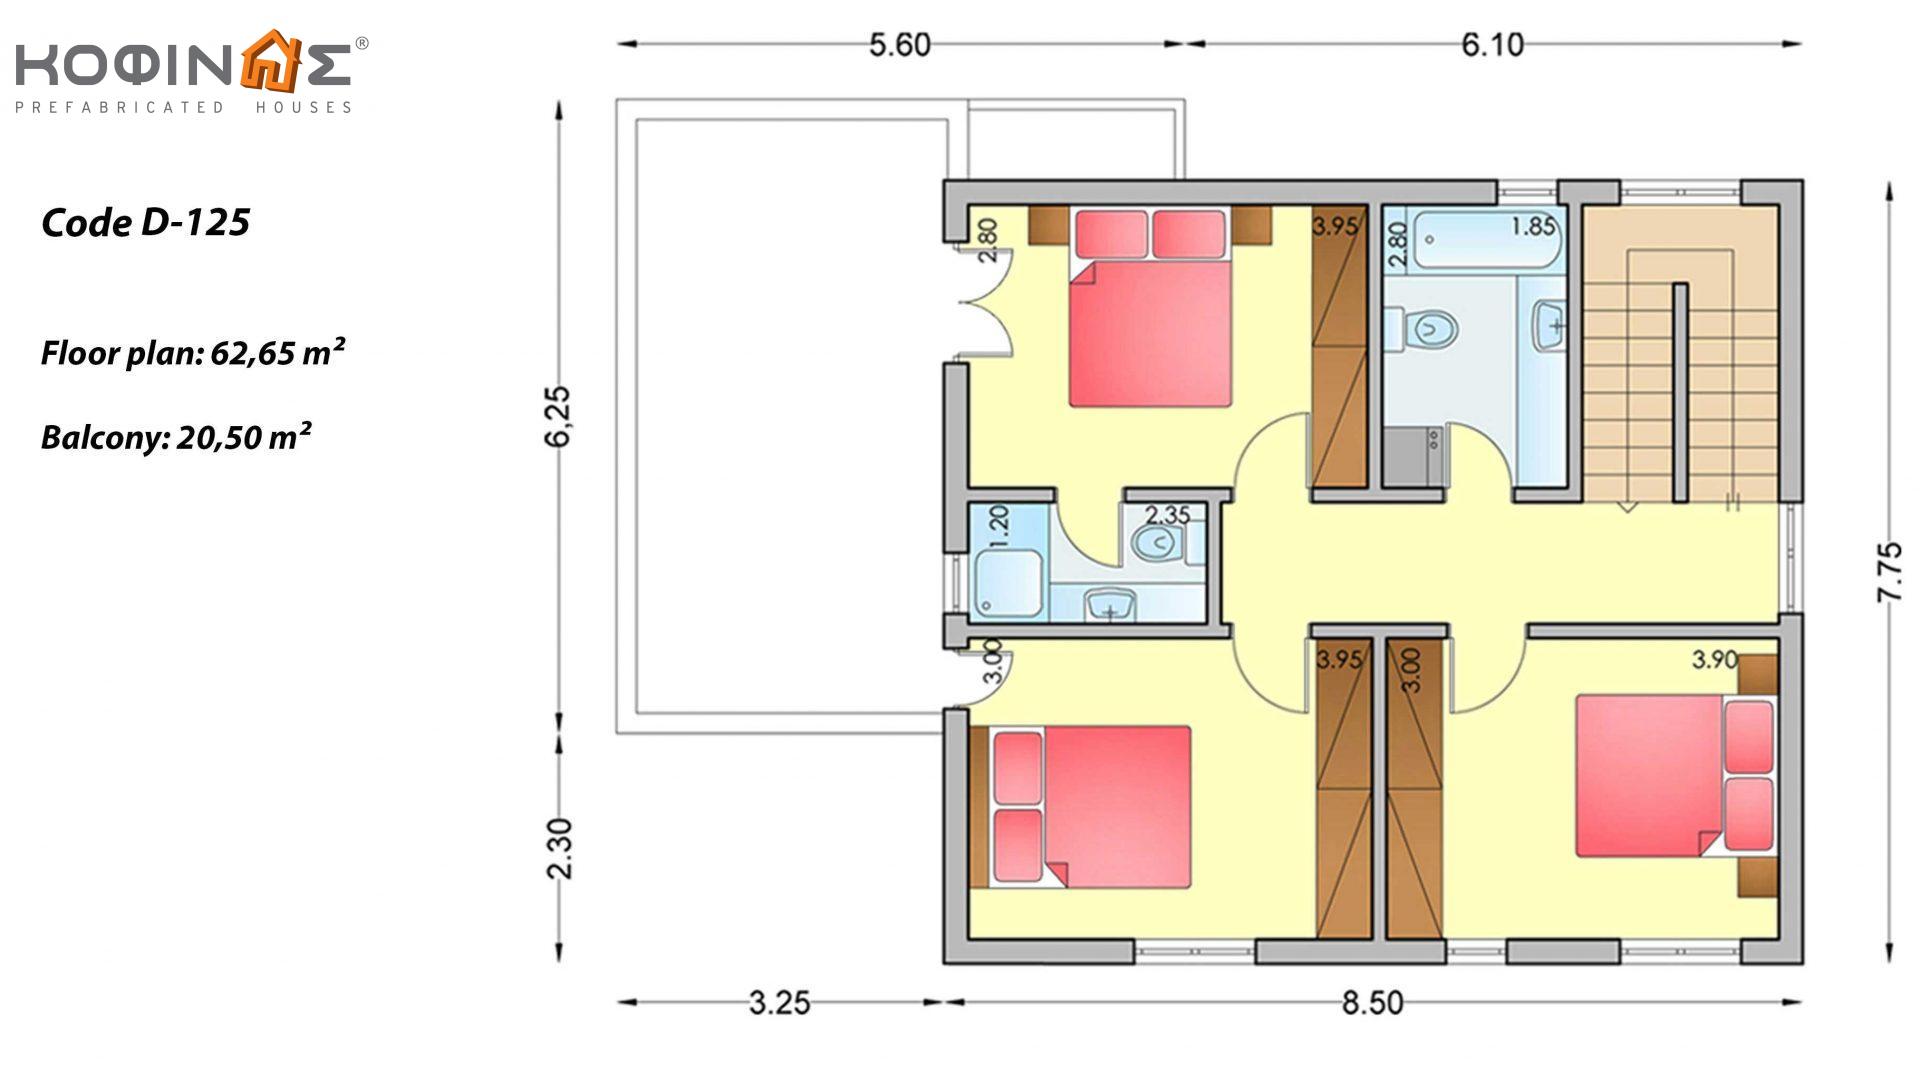 2-story house D-125, total surface of 125.30 m², +Garage 20.50 m²(=145.80 m²),covered roofed areas 4.70 m²,balconies 20.50 m²